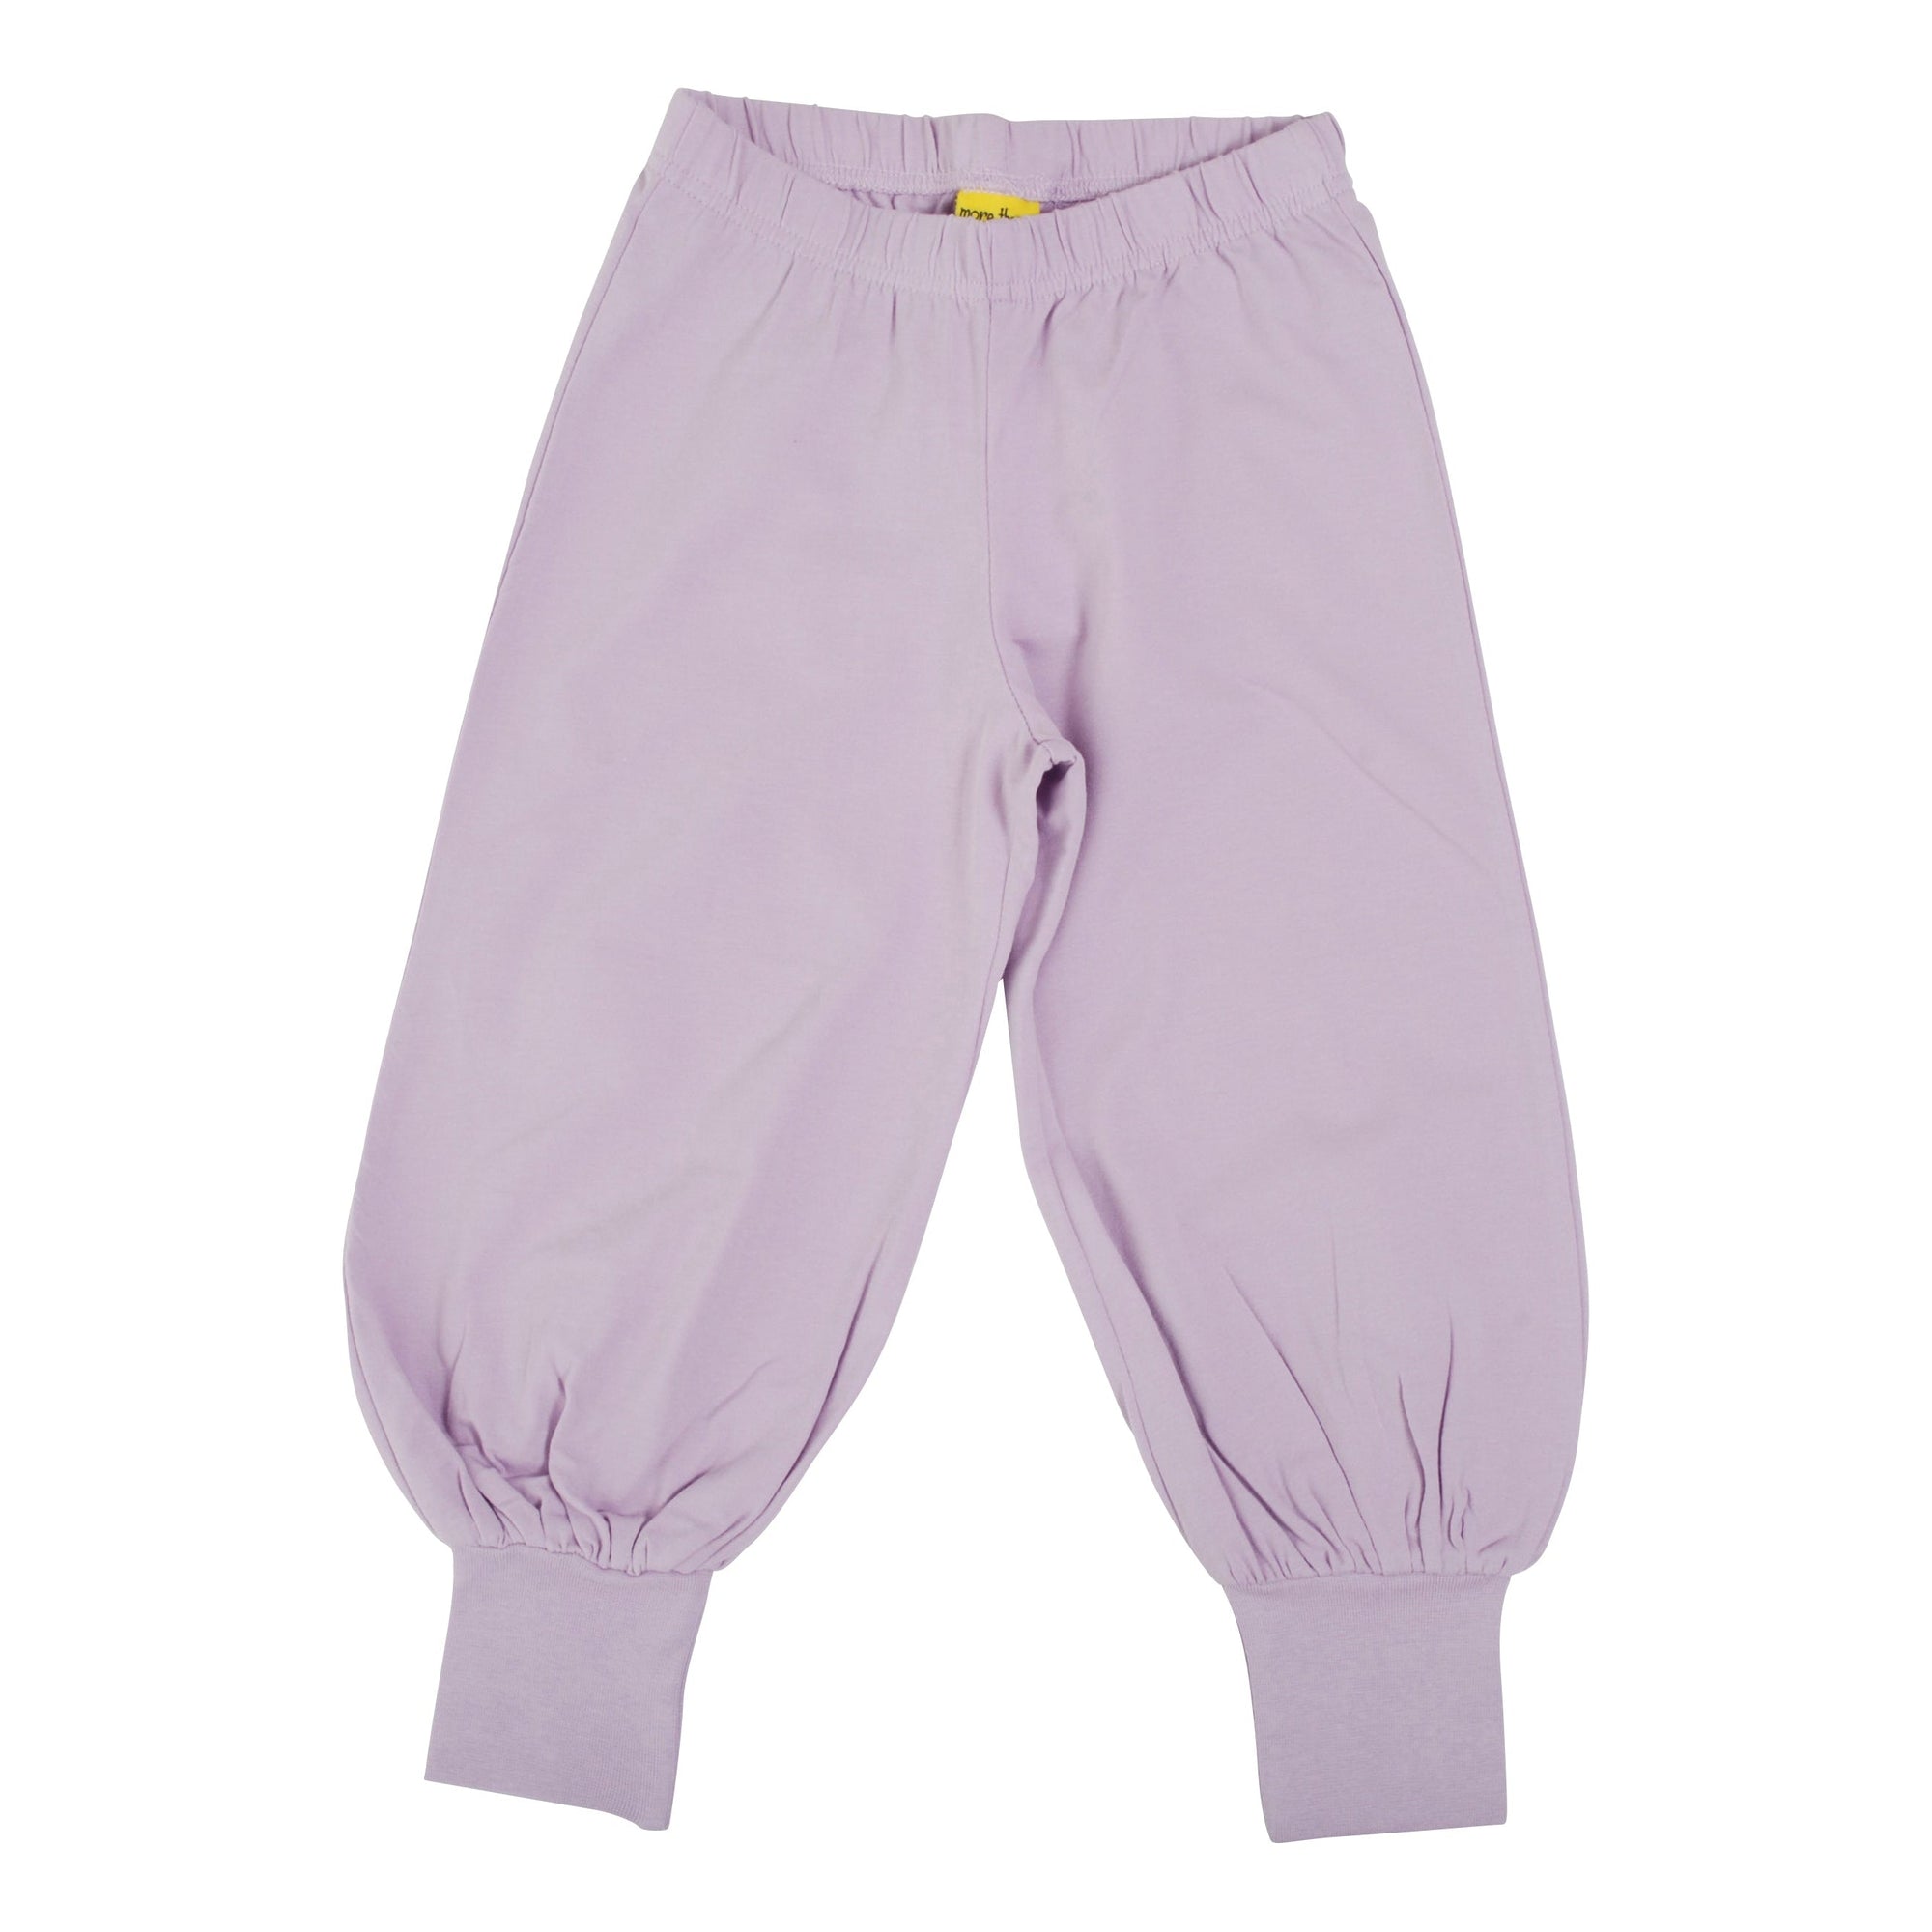 Orchid Bloom Baggy Pants - 2 Left Size 8-10 & 12-14 years-More Than A Fling-Modern Rascals